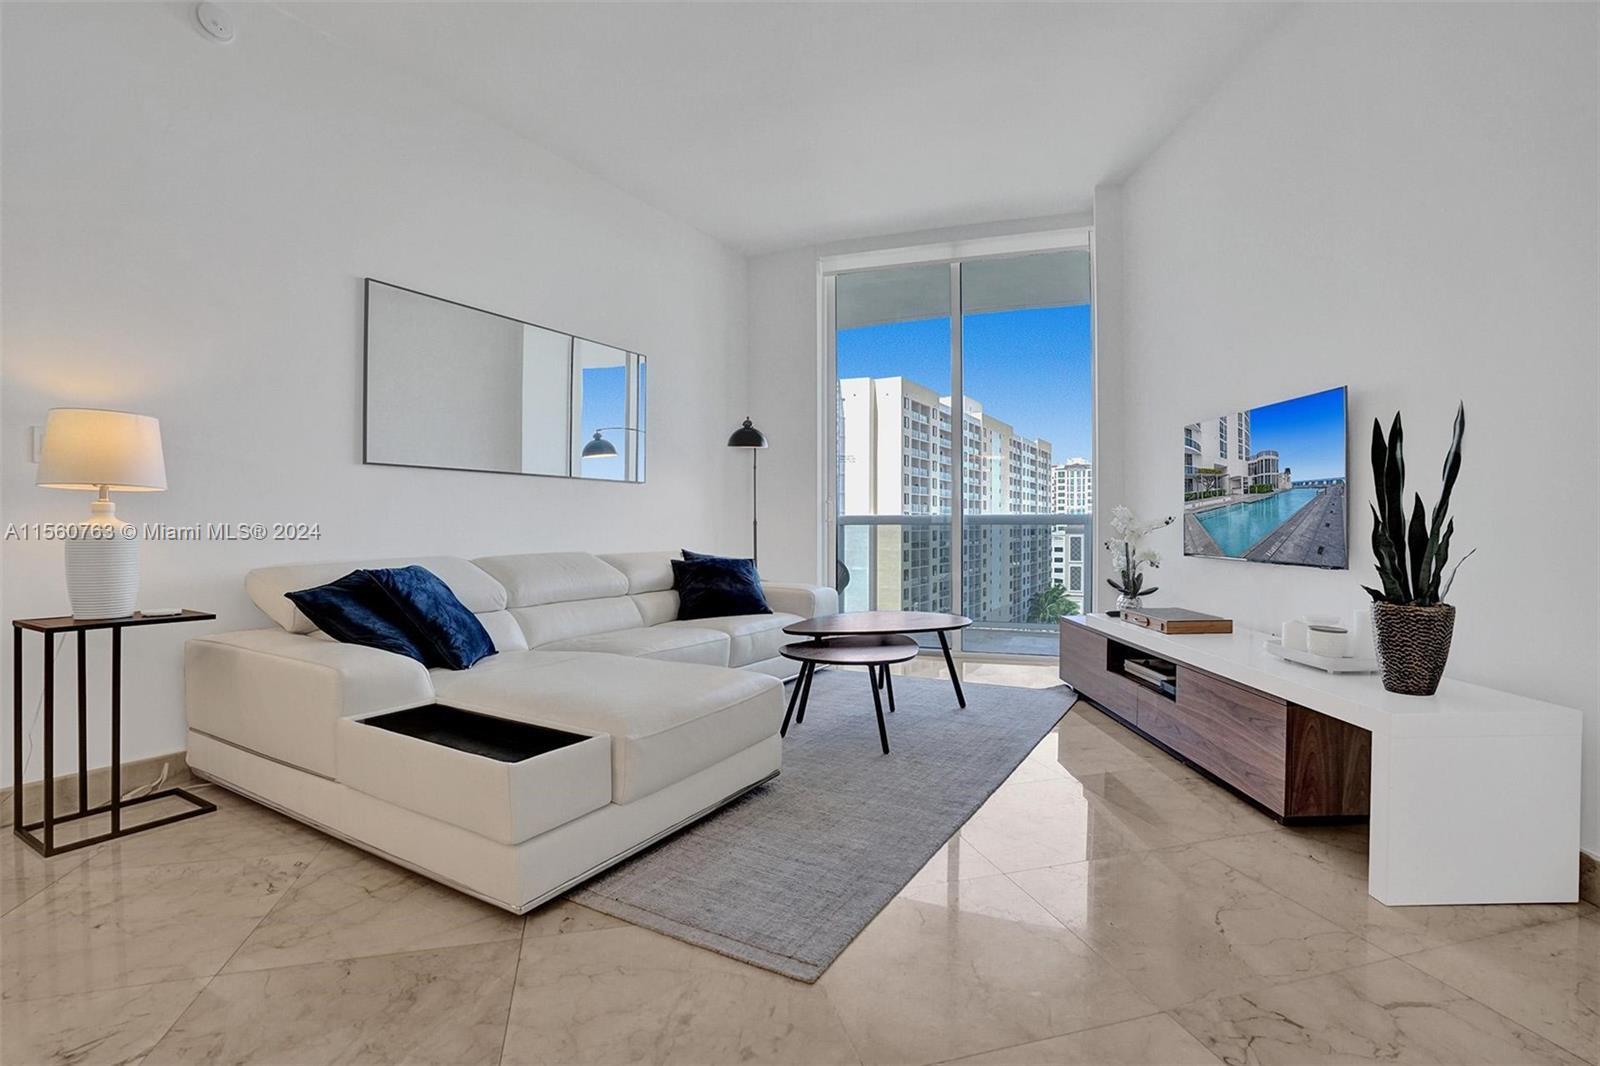 Photo of 16001 Collins Ave #805 in Sunny Isles Beach, FL